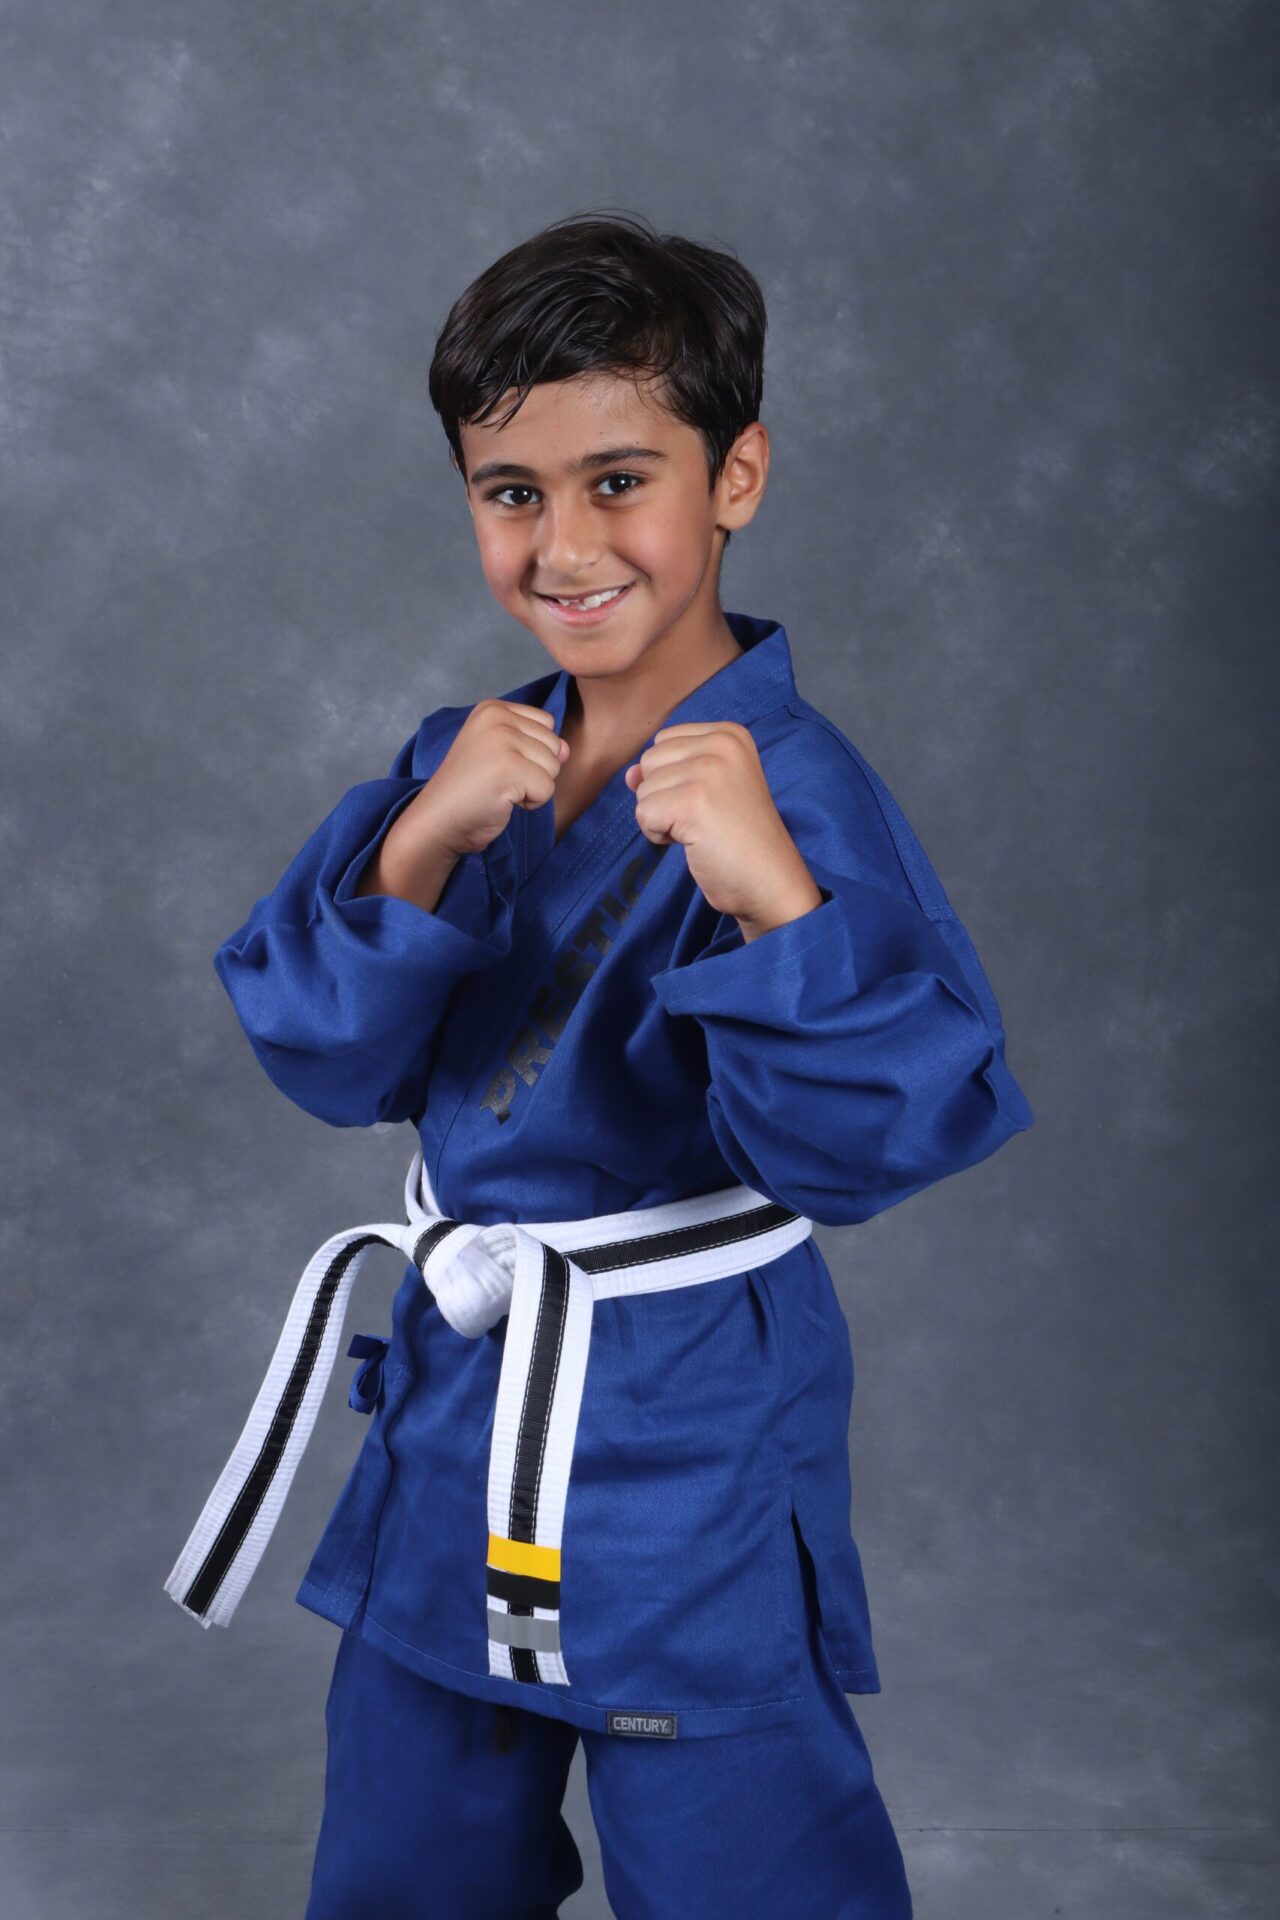 Kids Martial Arts 7-year-olds